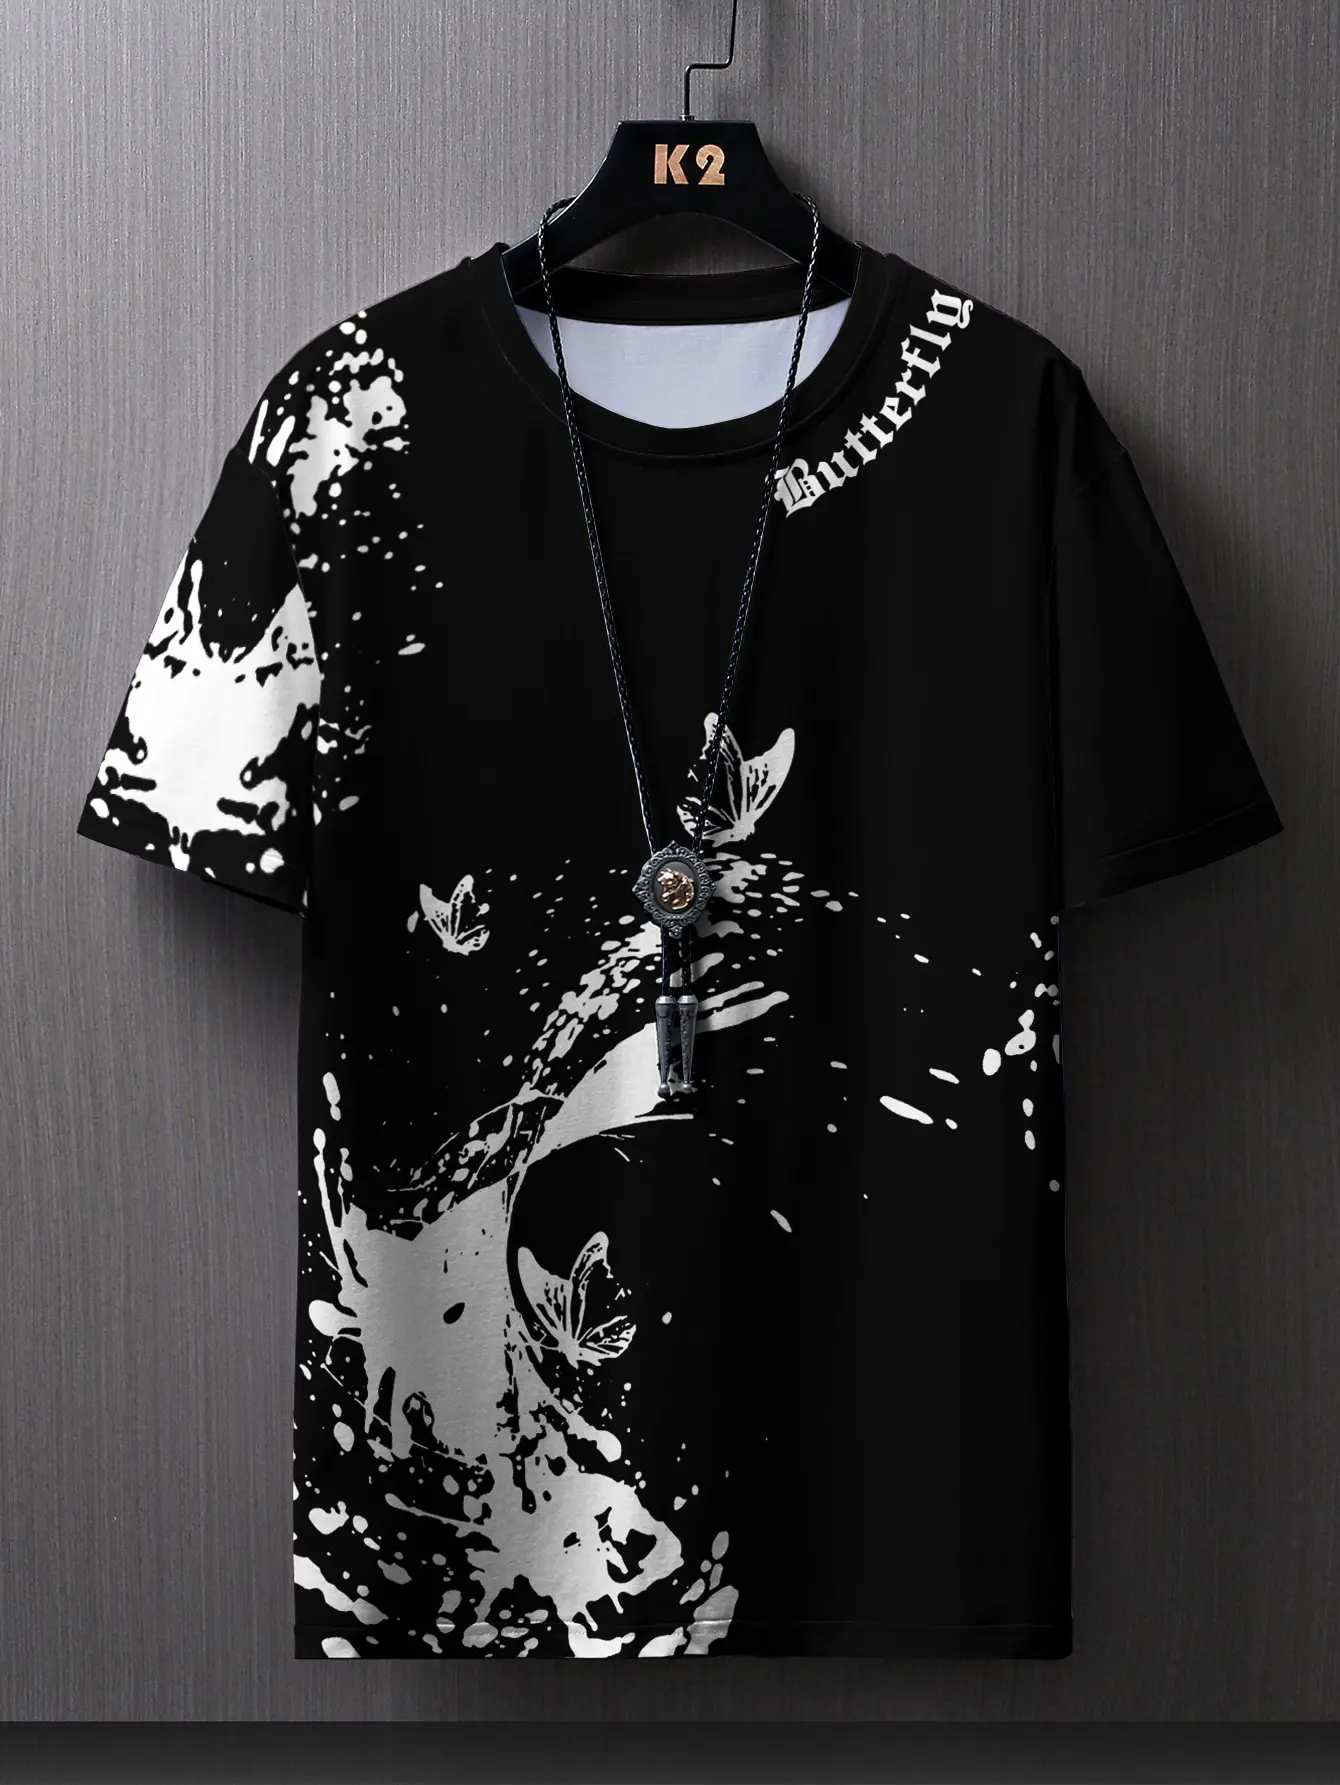 Men's T-Shirt Round Neck Pullover Short Sleeve T-Shirt Casual Top